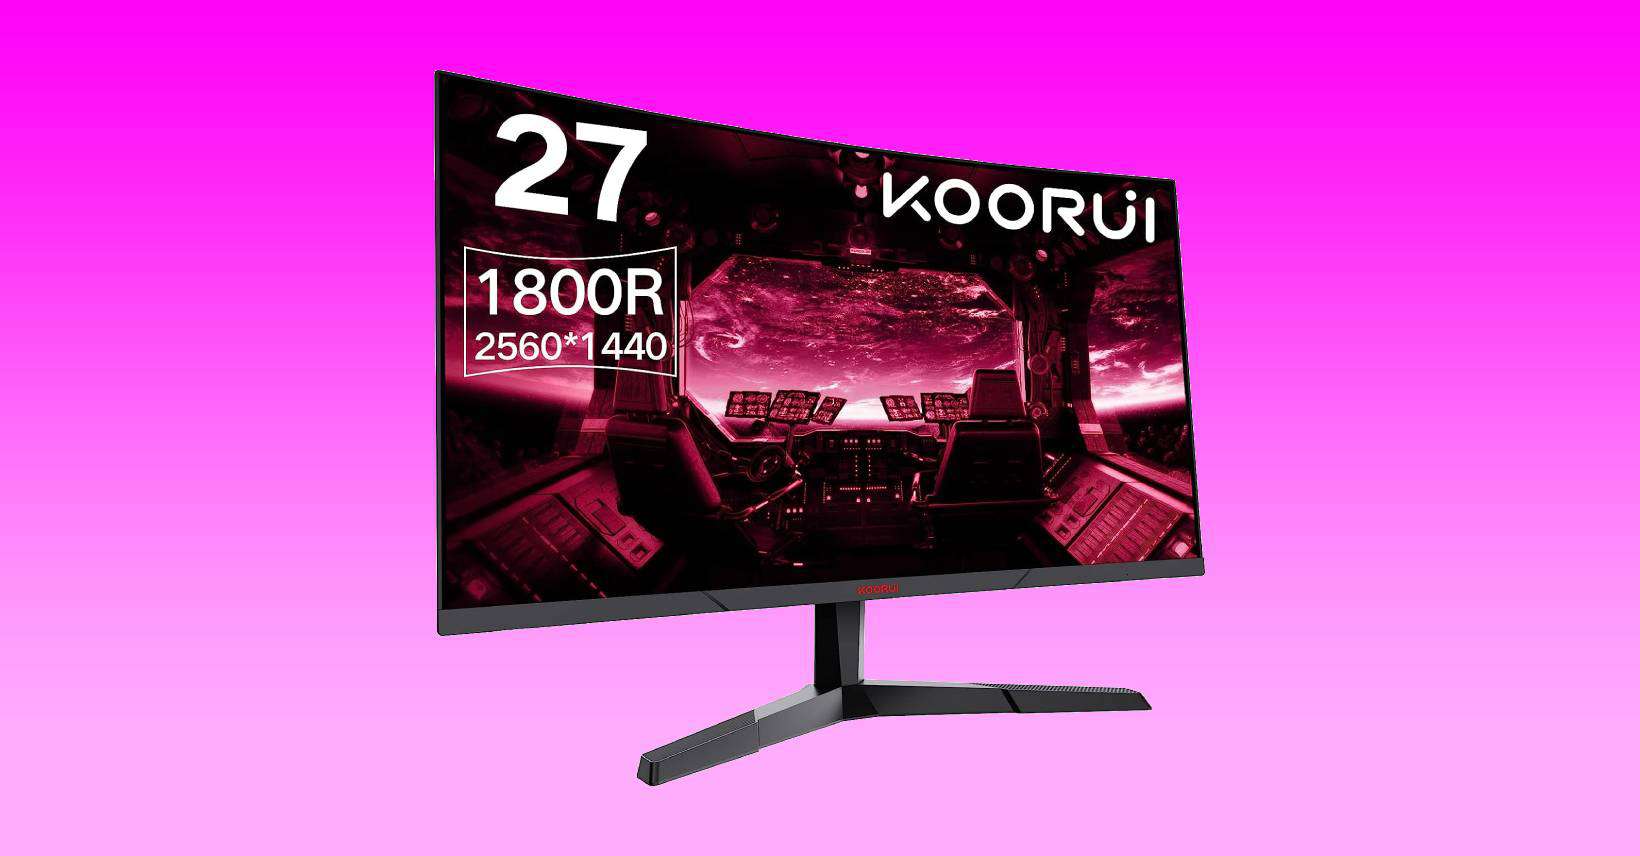 Affordable KOORUI 144Hz Curved Gaming Monitor slashed $46 in Amazon deal